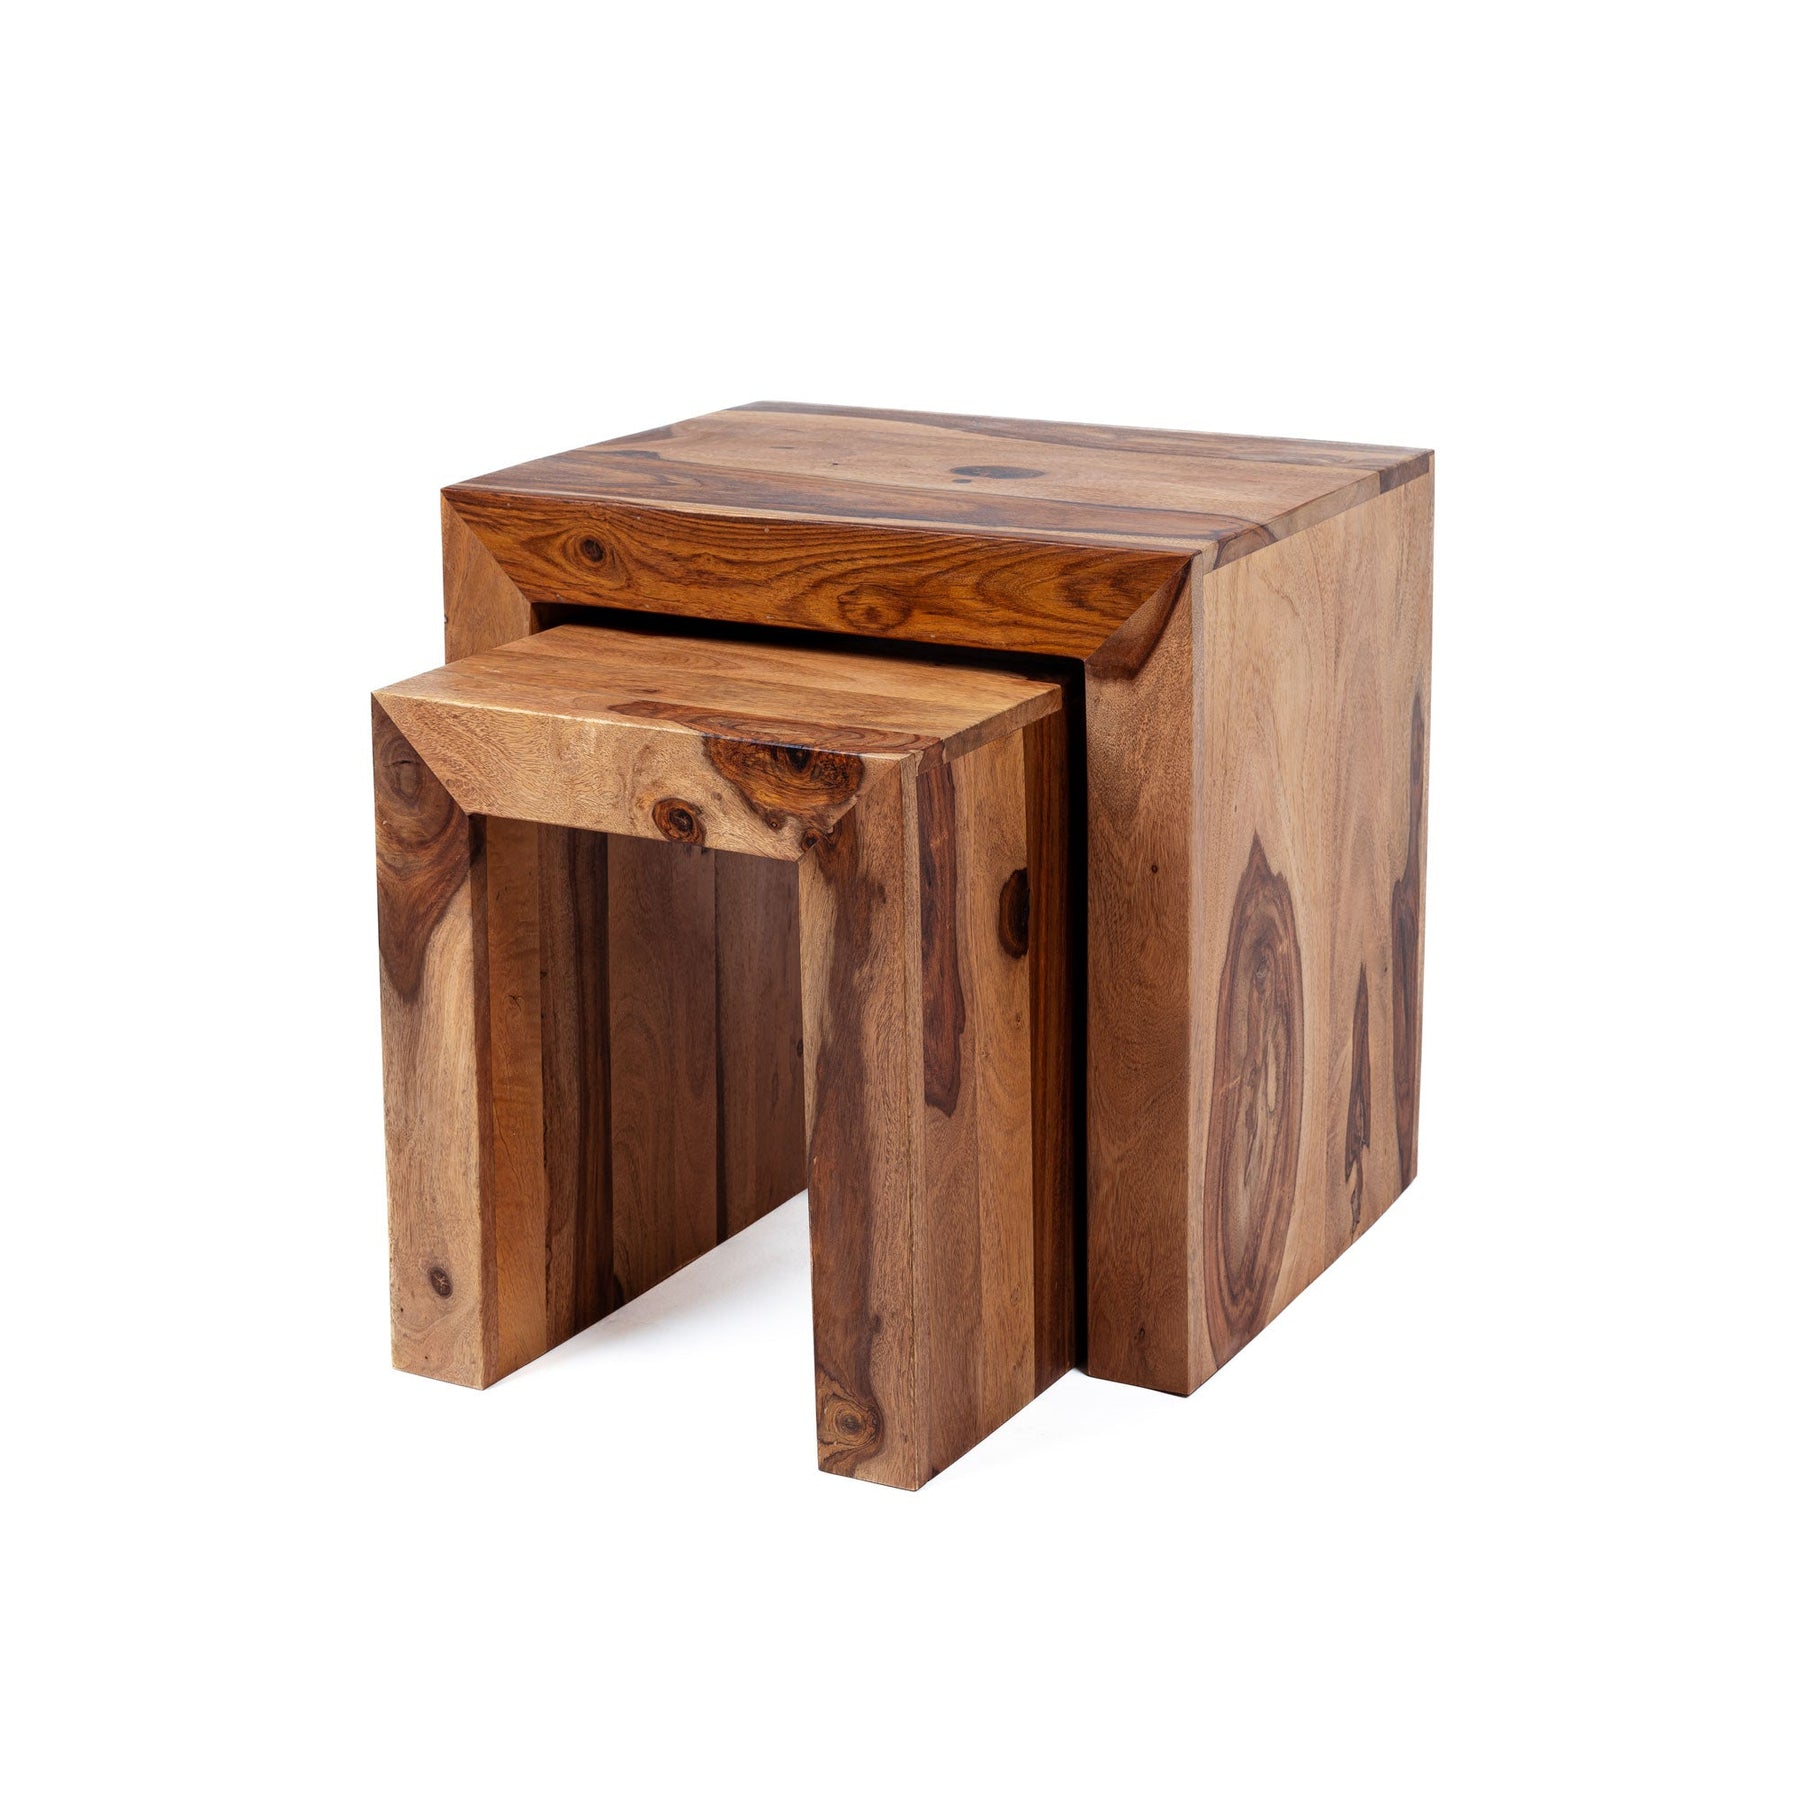 Zen Side Table Set - Wooden Side Tables Night Stand | 2 Sizes Available